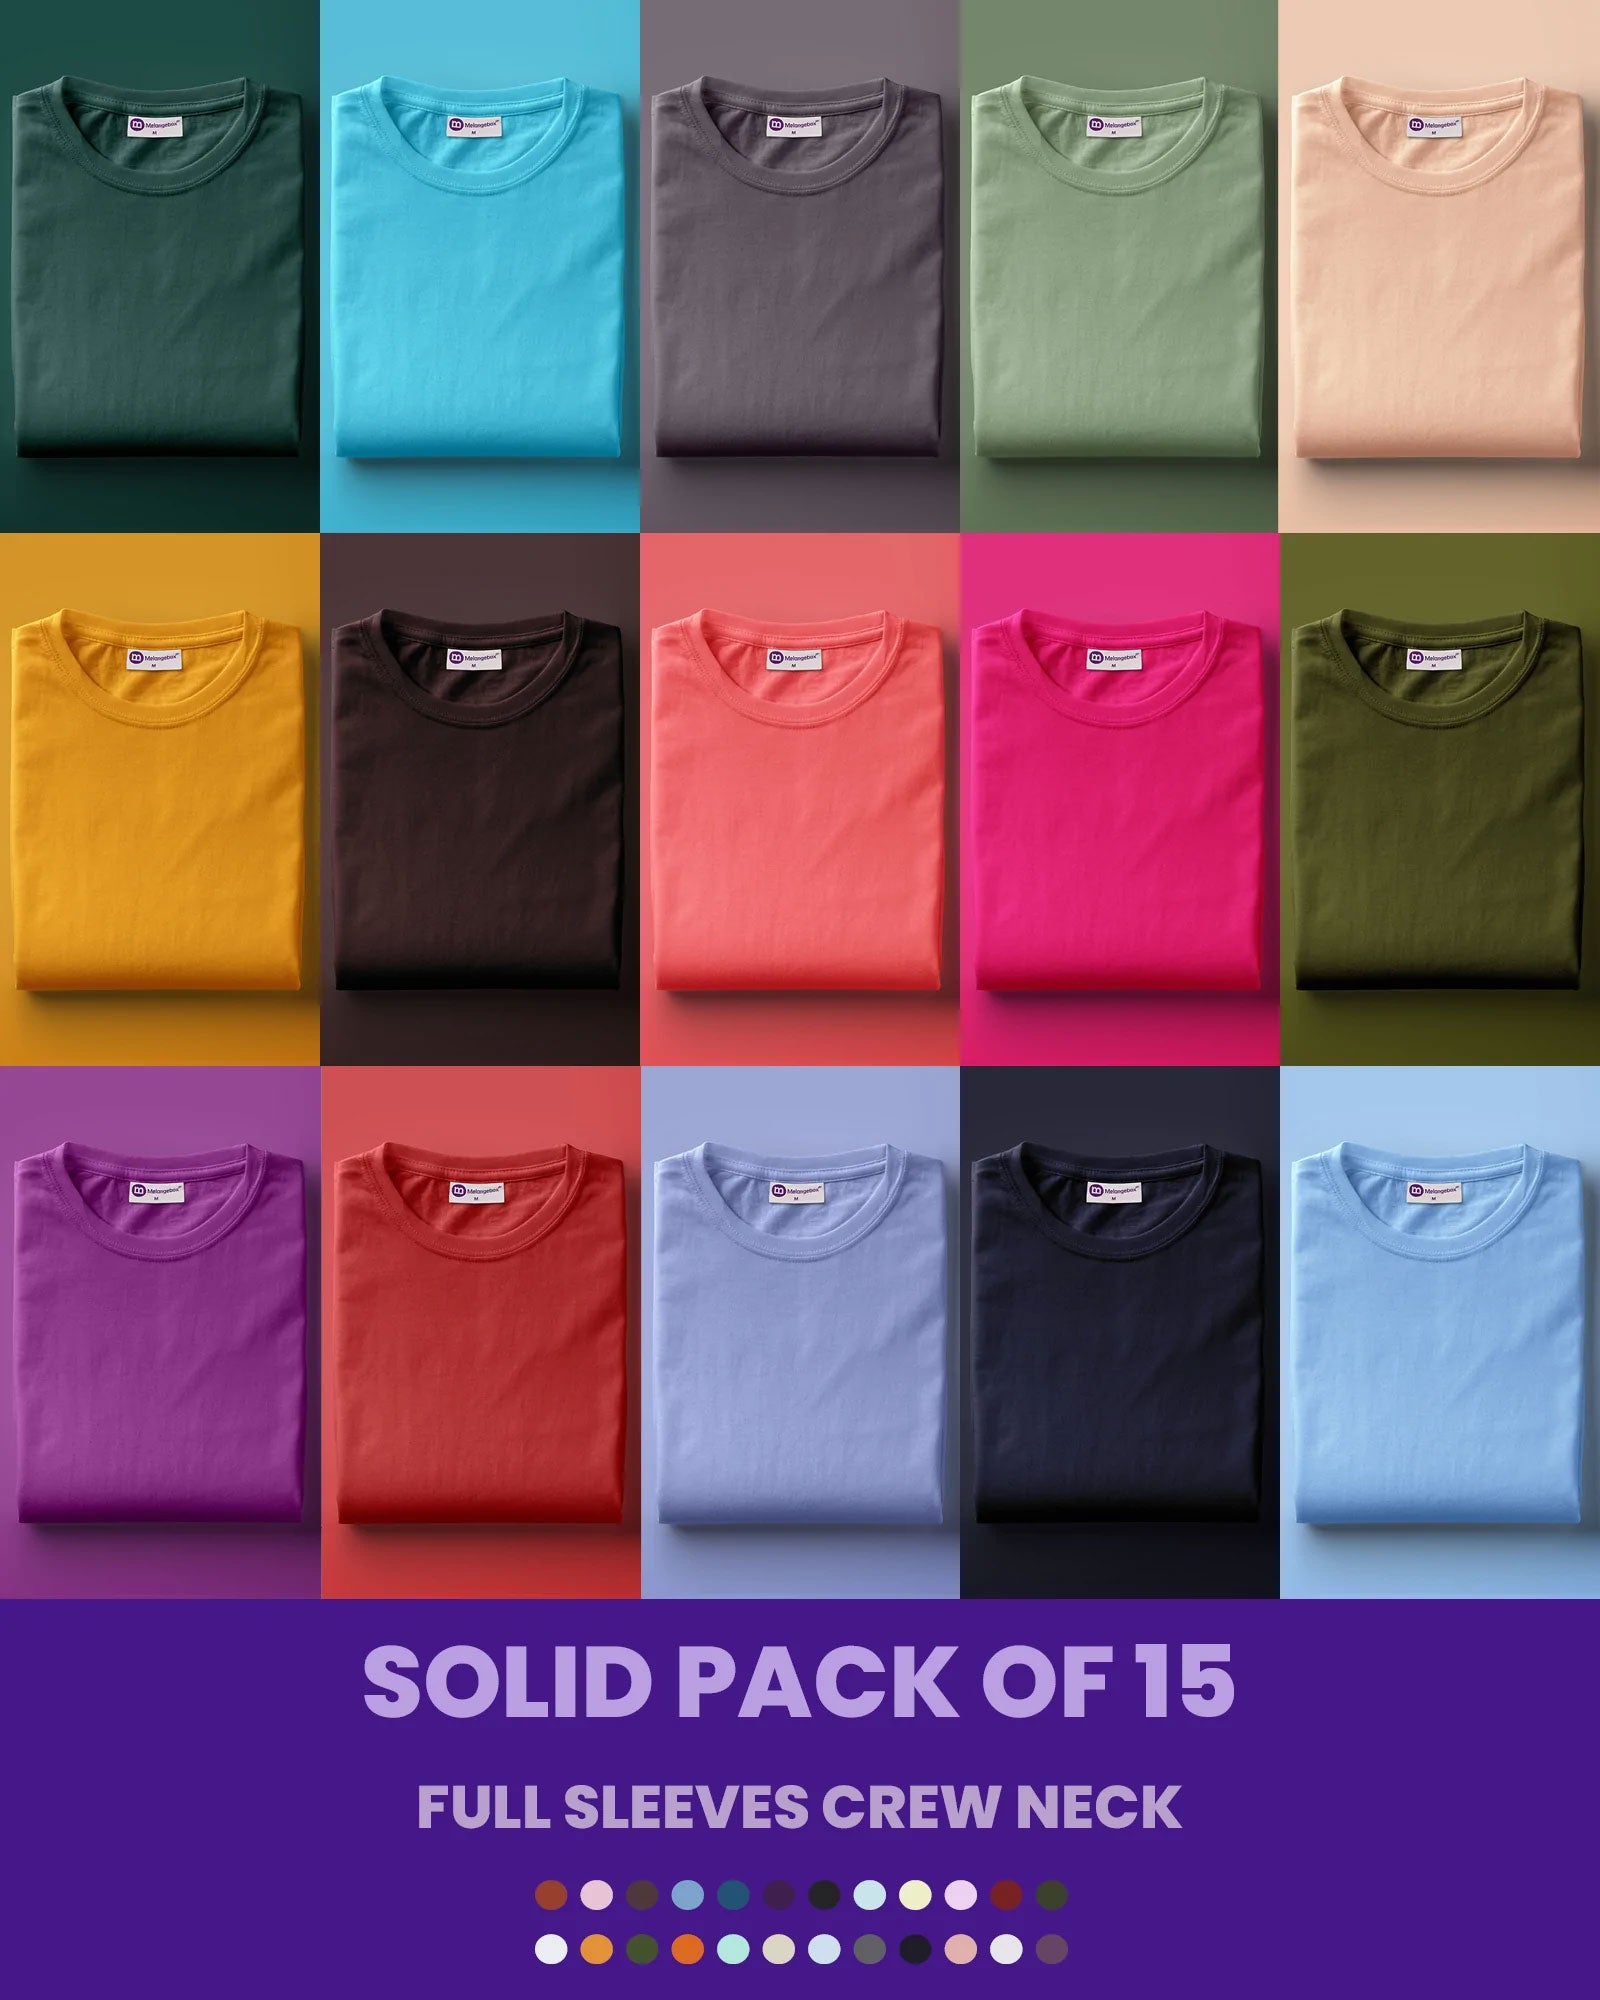 Solid Pack of 15: Full Sleeves Crew Neck